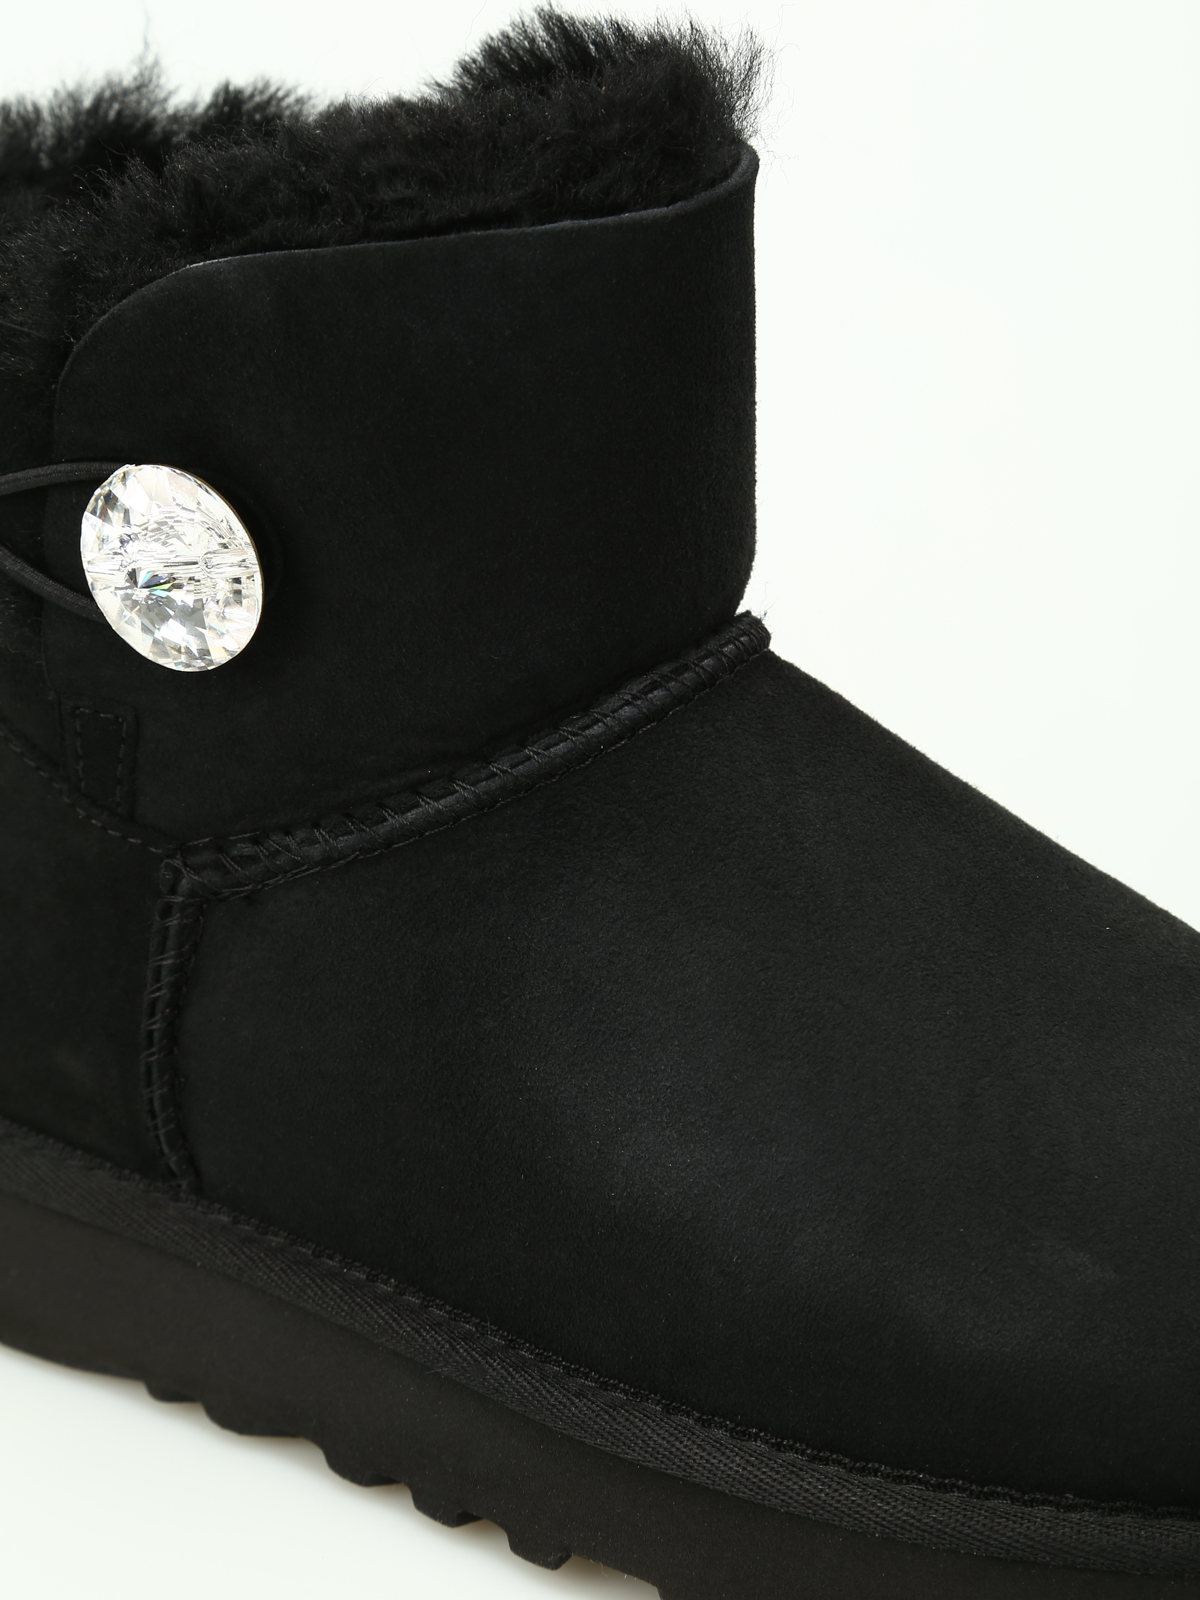 ugg boots bailey button sale